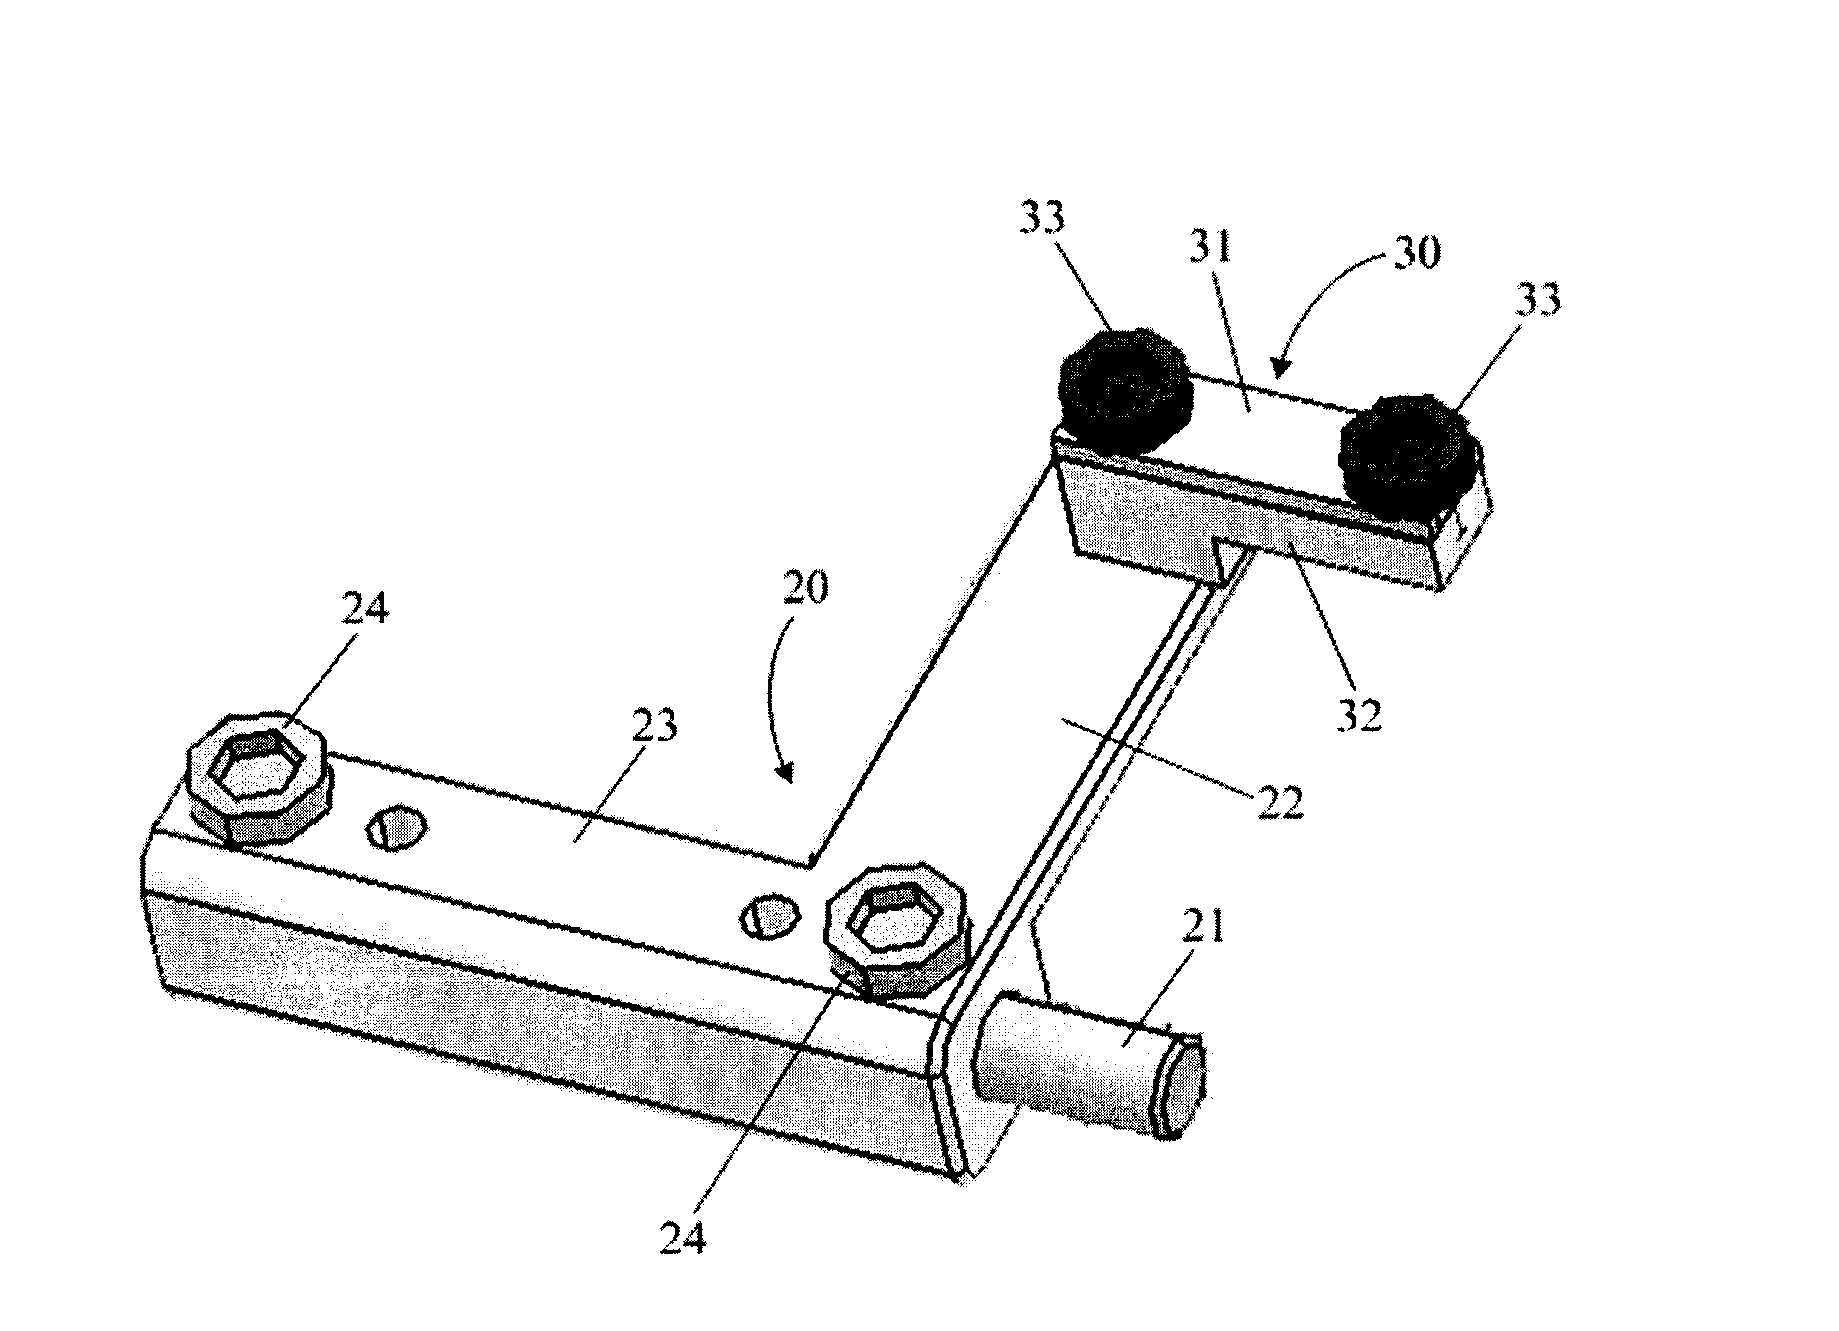 Device and method for measuring peripheral muscle tension of rat paw